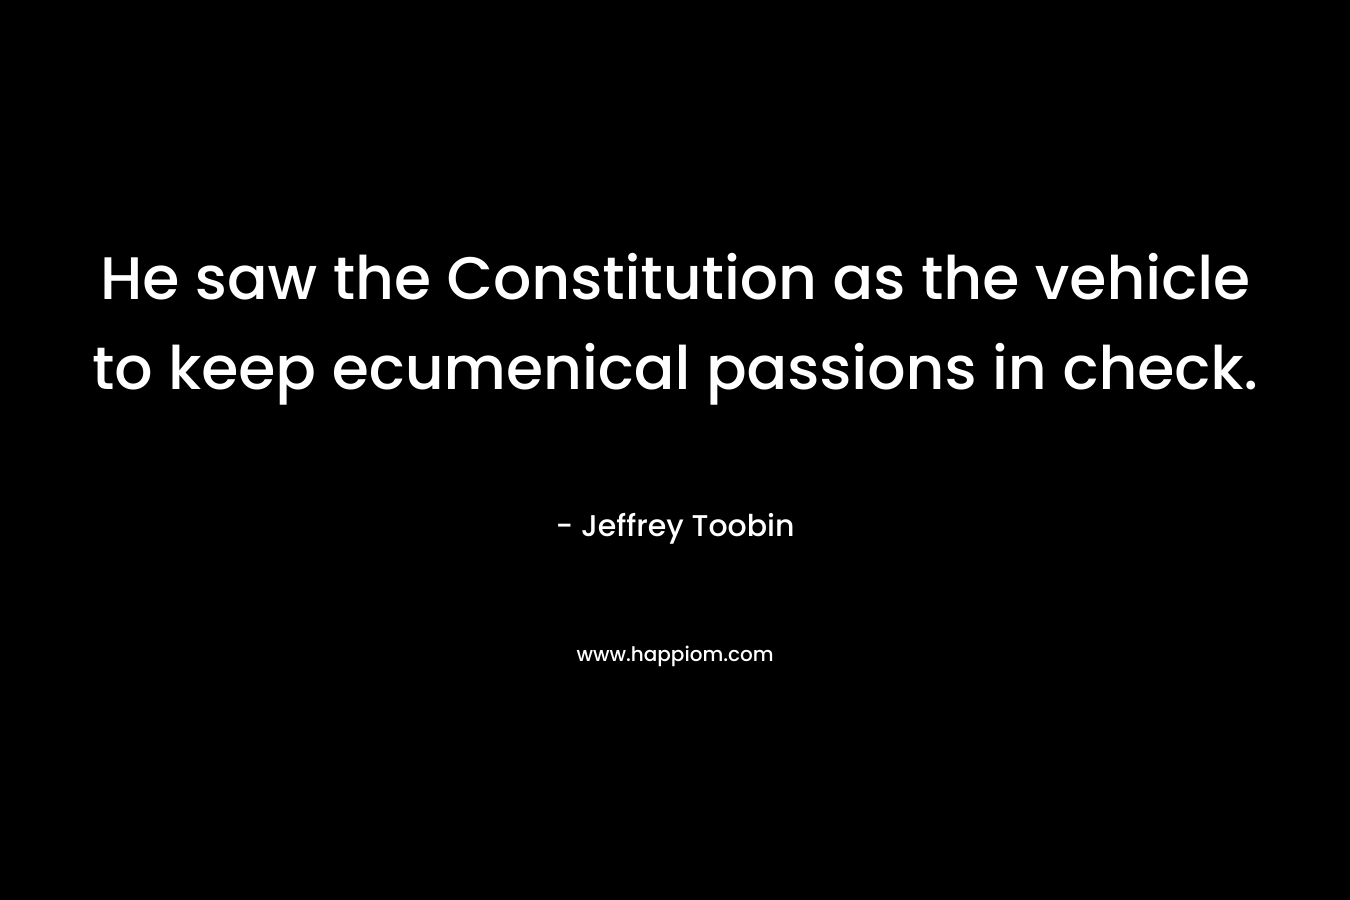 He saw the Constitution as the vehicle to keep ecumenical passions in check. – Jeffrey Toobin